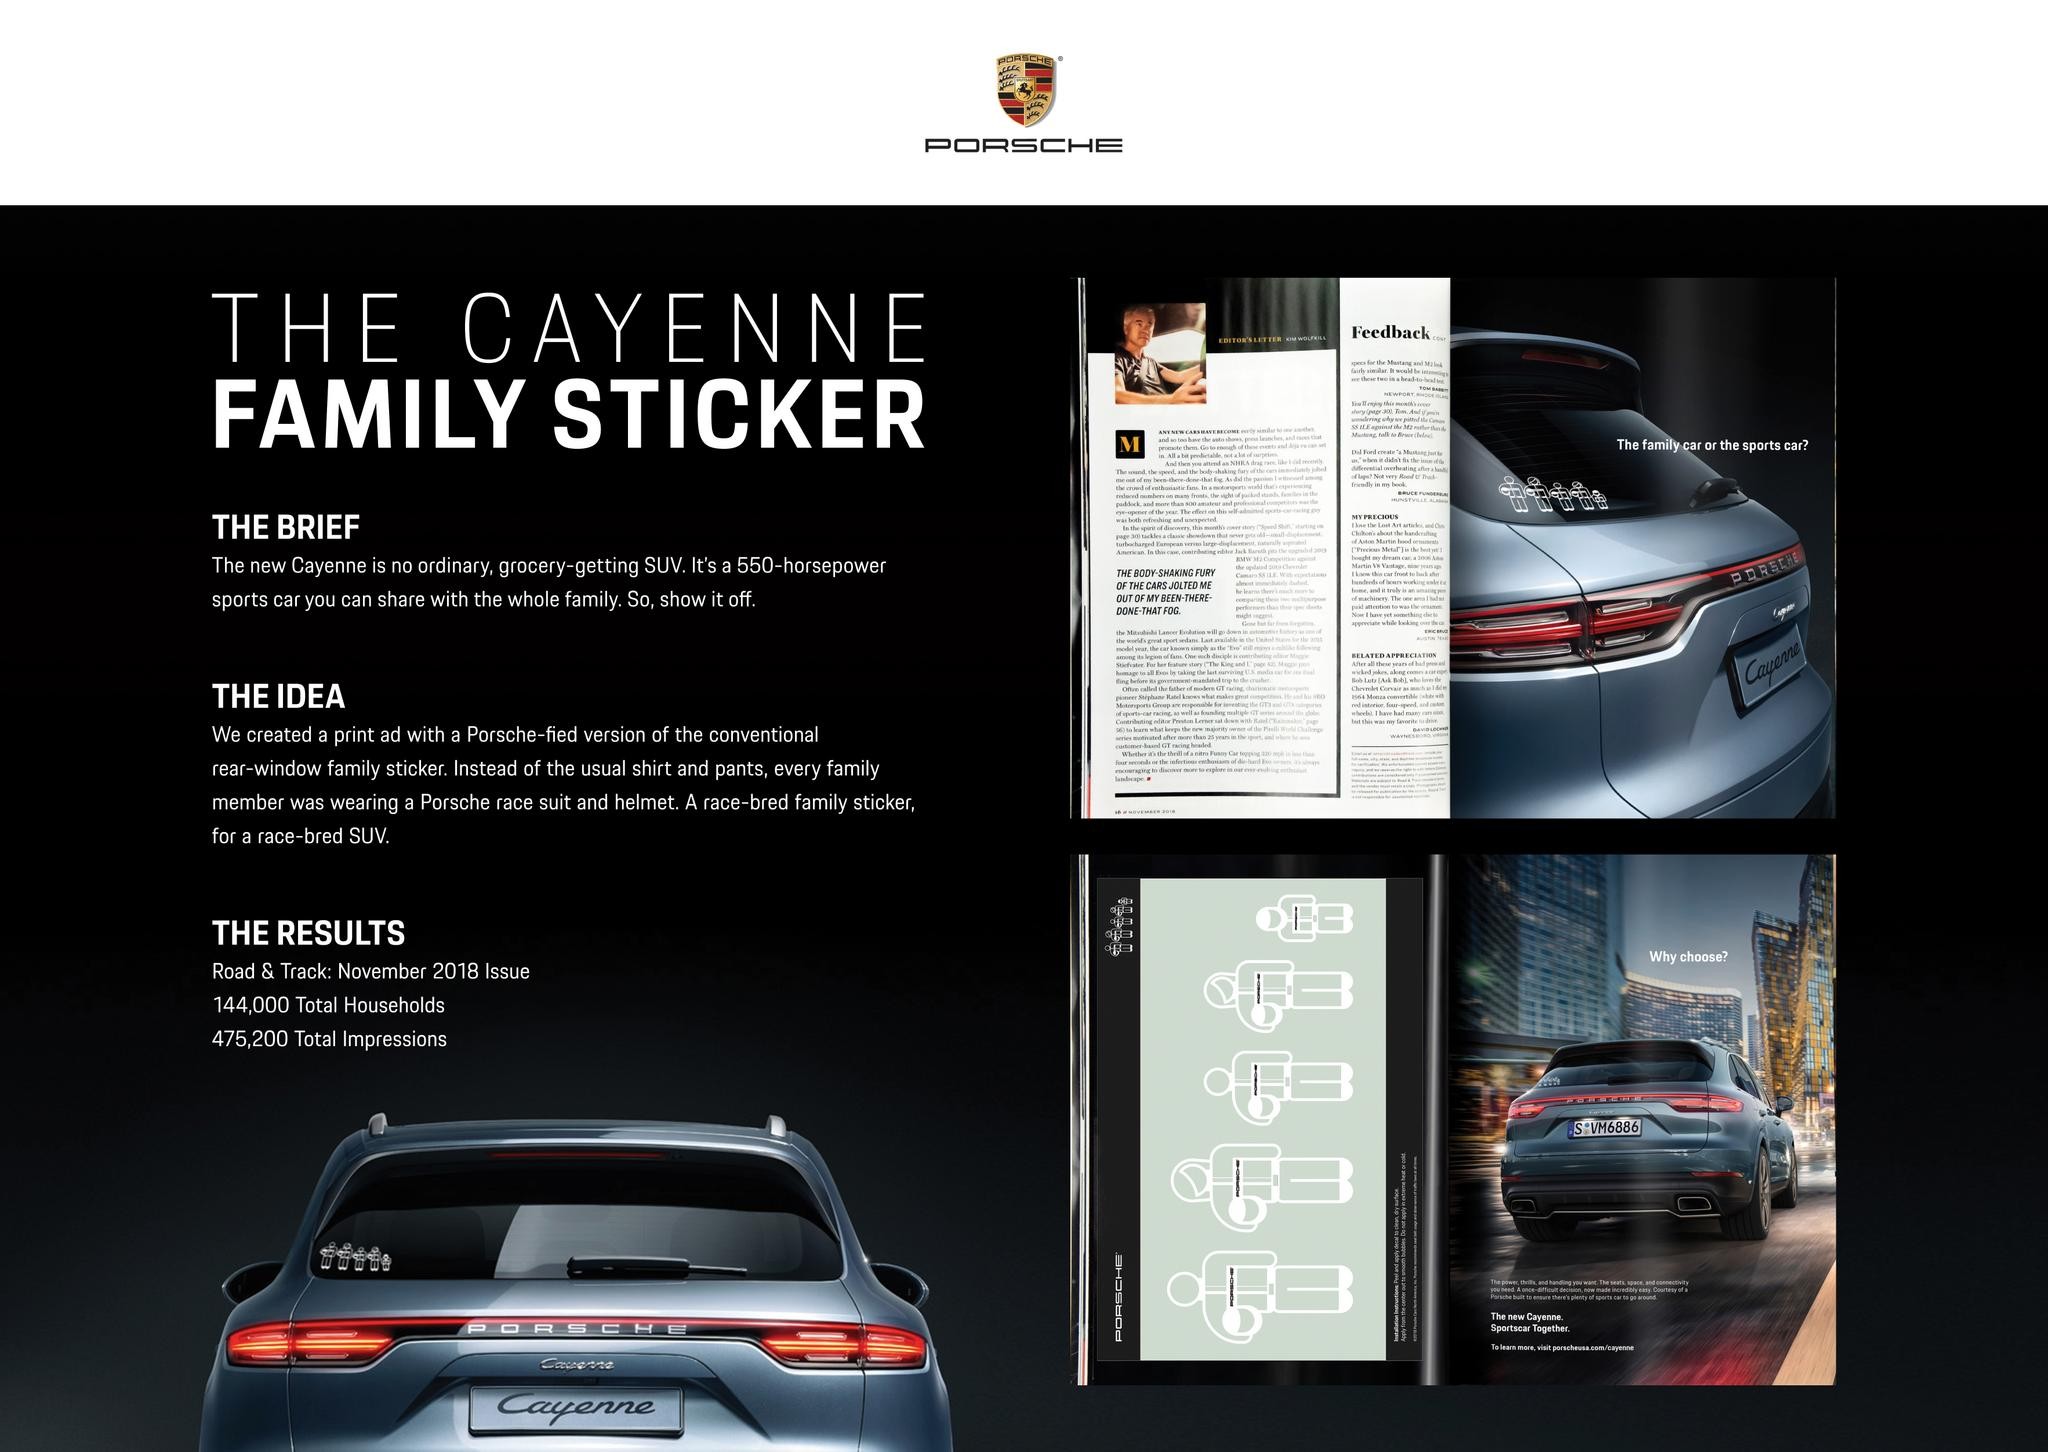 The Cayenne Family Sticker